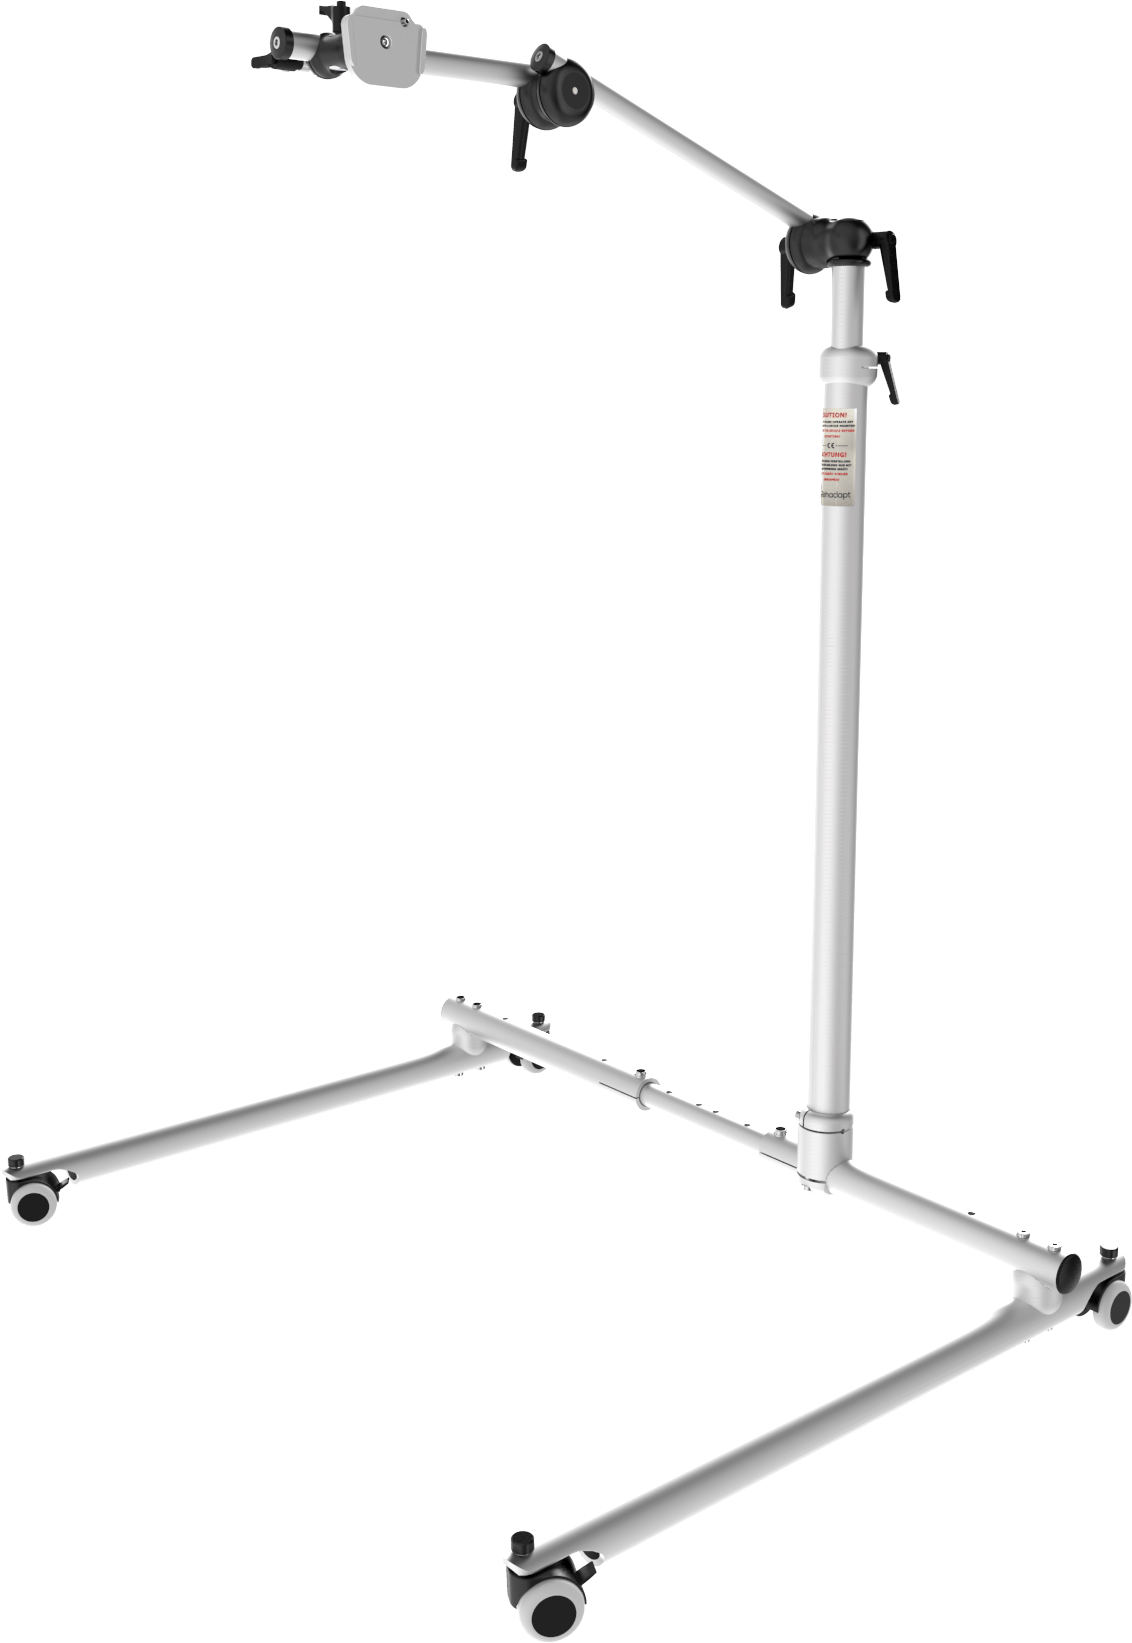 Classic Vario floor stand with adjustable height and base, by Rehadapt